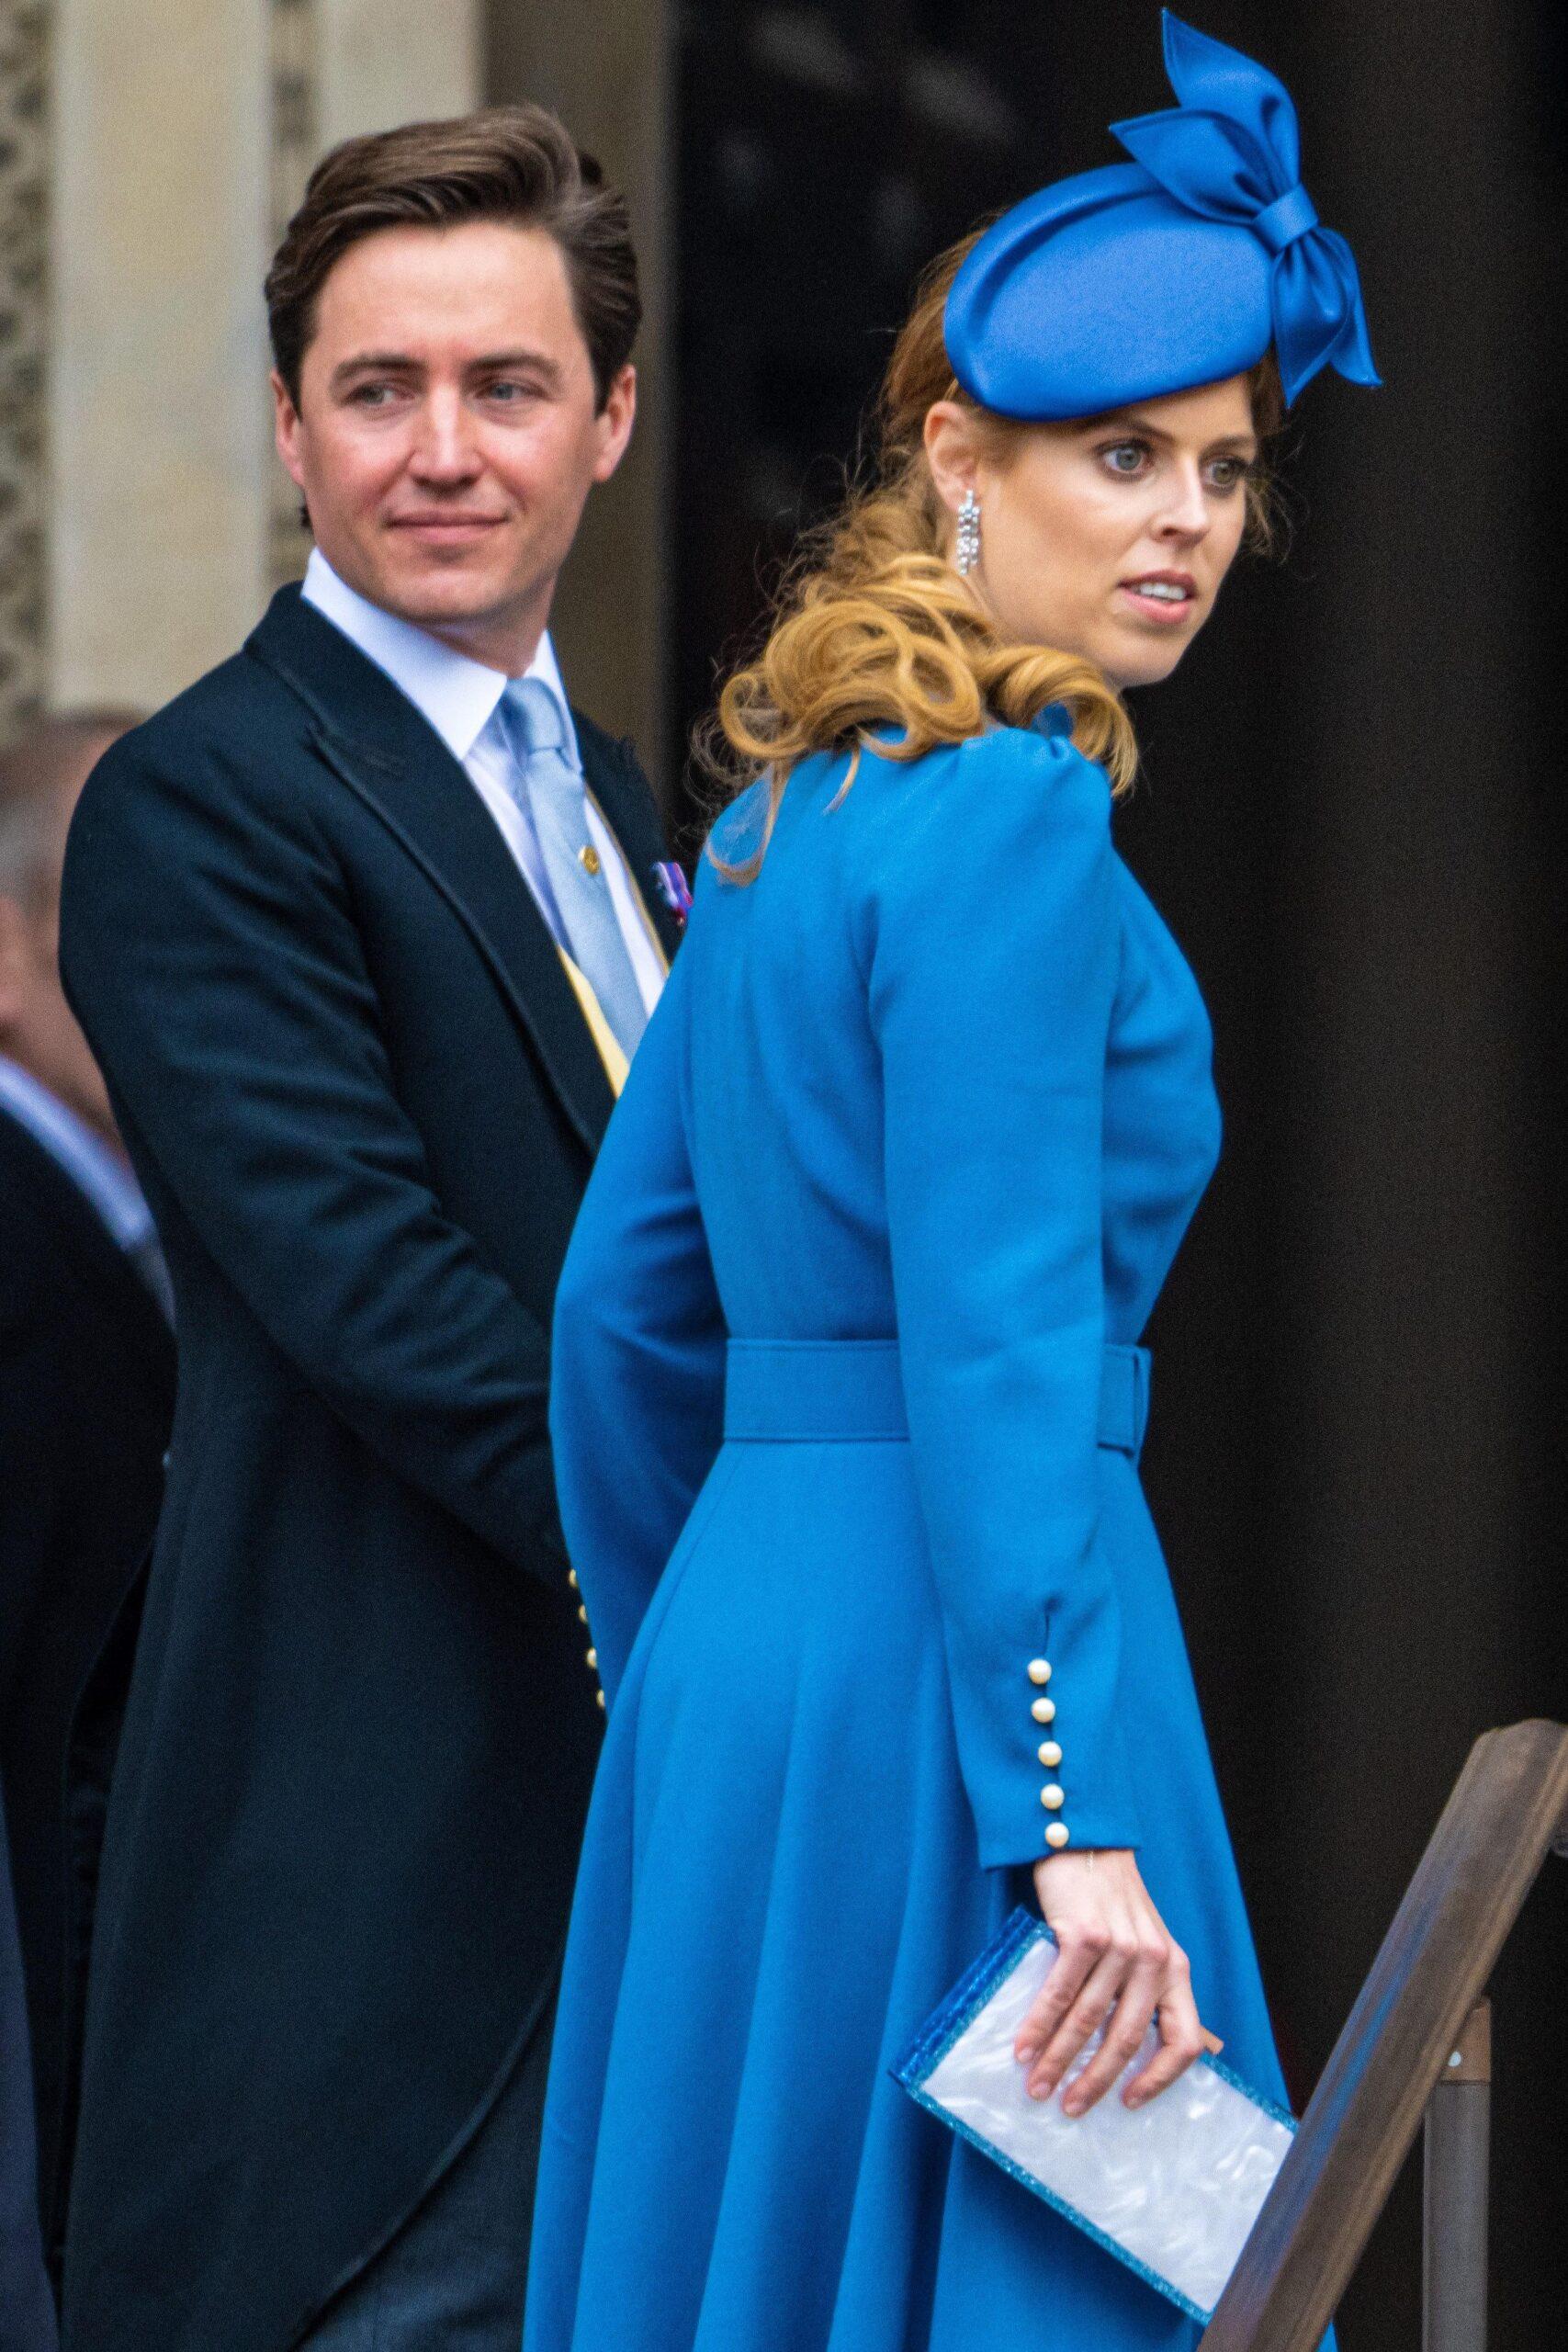 Princess Beatrice of York with her husband Edoardo Mapelli Mozzi attending the Service of Thanksgiving for the Queen, marking the monarch's 70 year Platinum Jubilee, at St Paul’s Cathedral in London